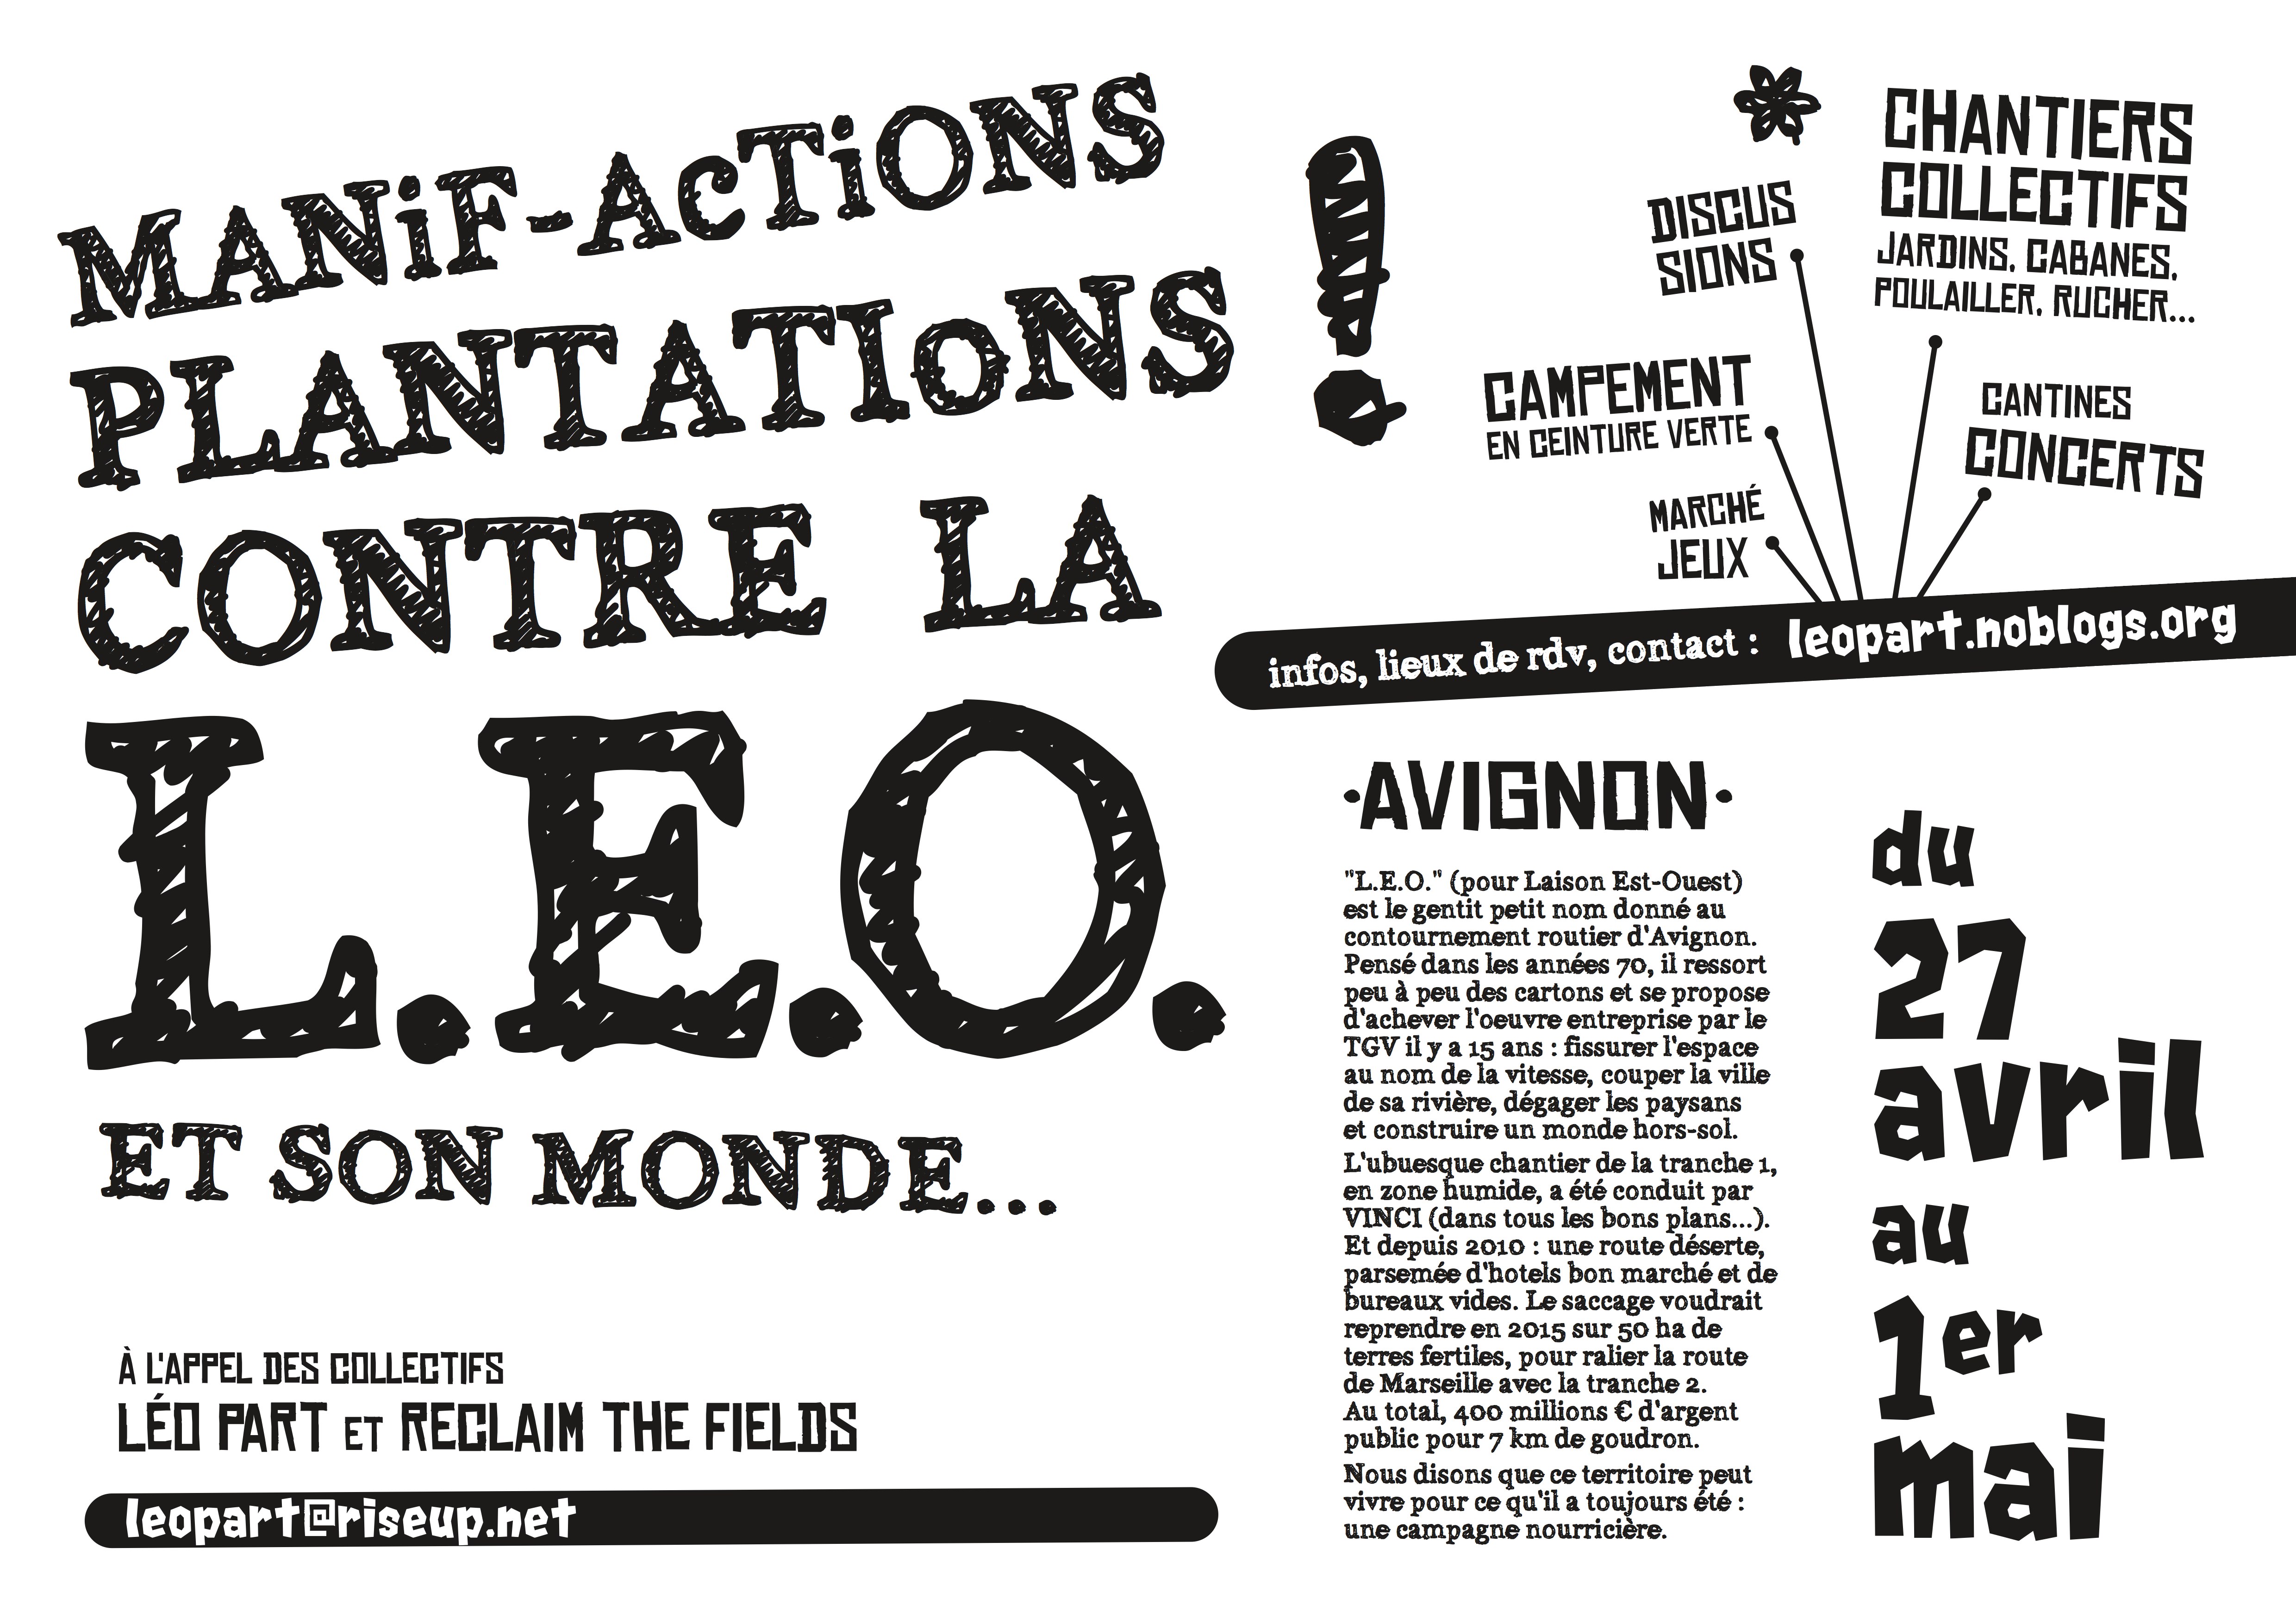 Manif action 27 avril 2013